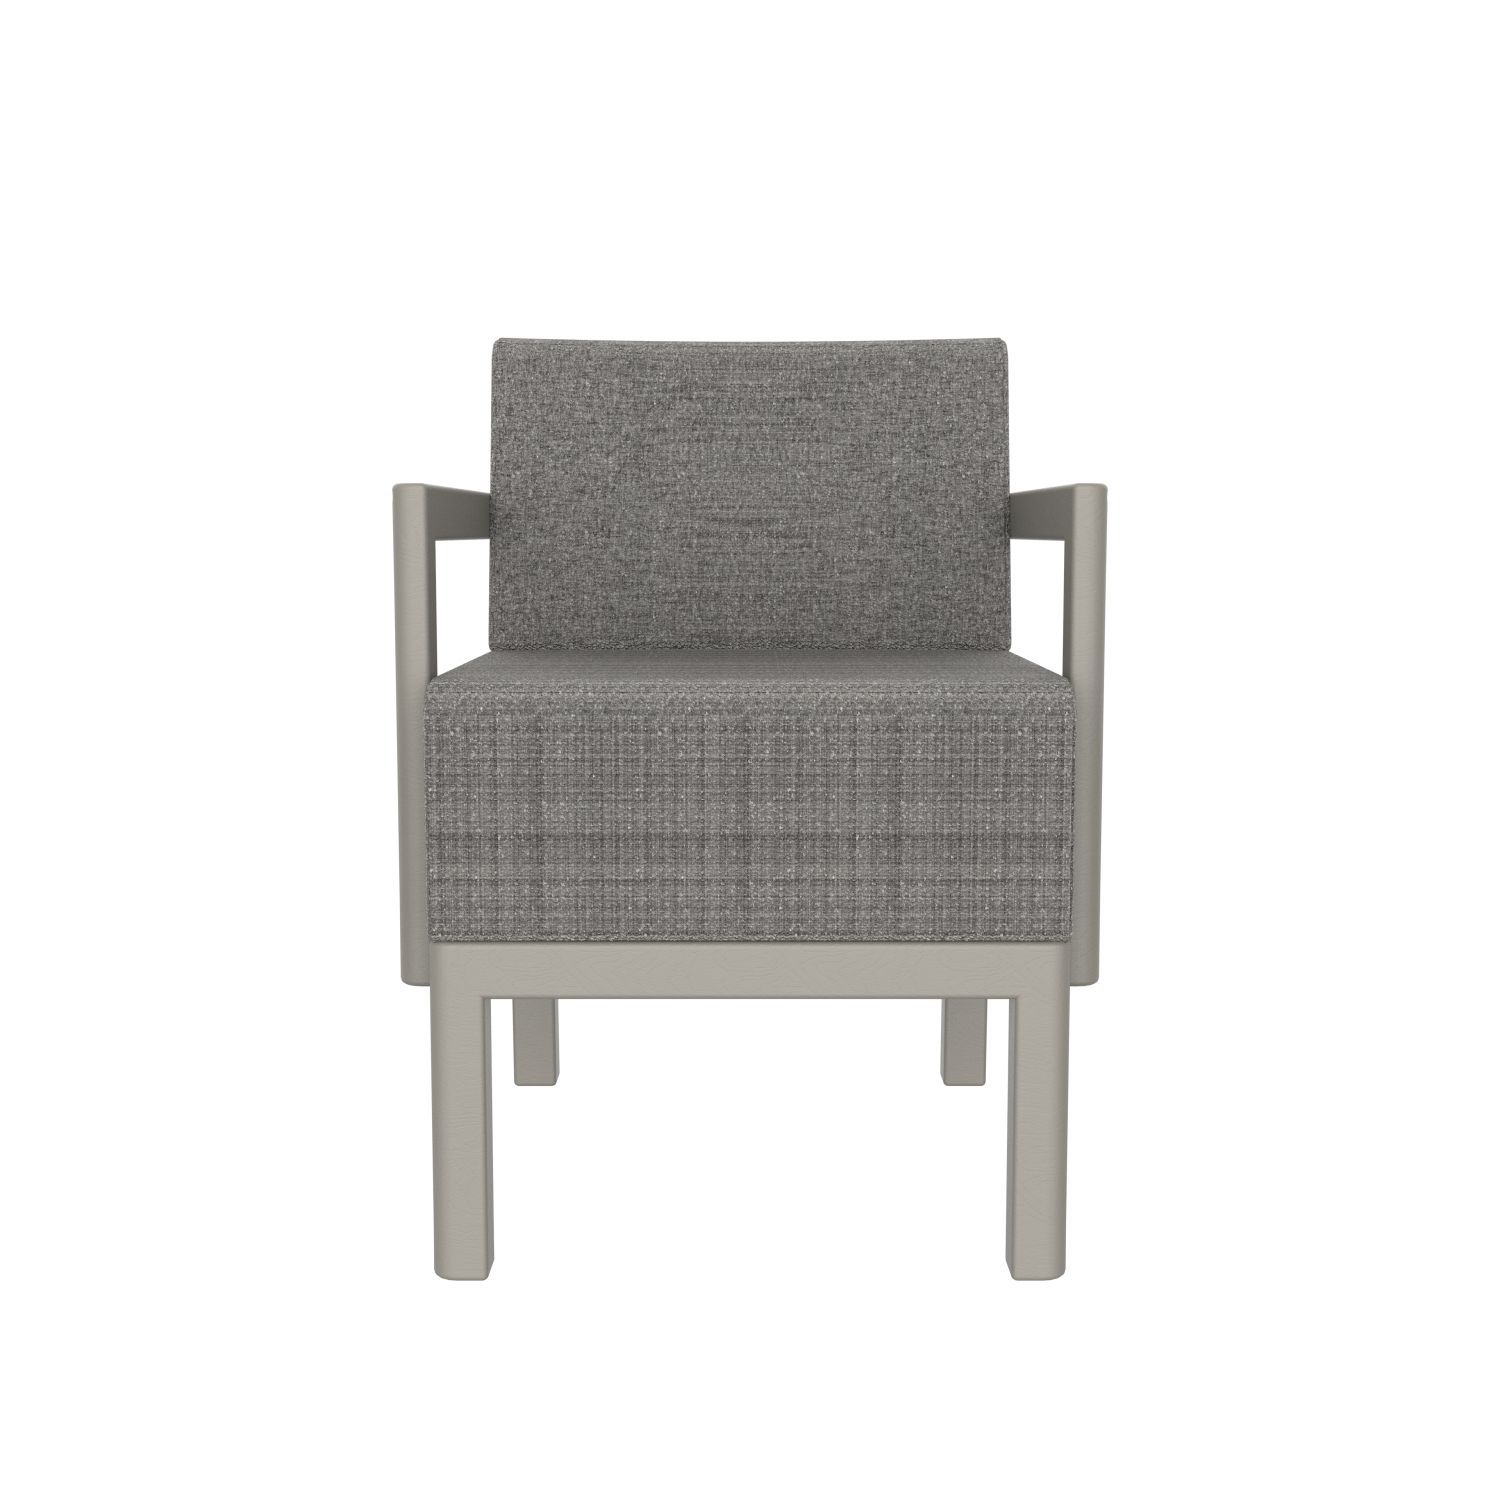 lensvelt piet boon chair 02 with armrests alpine steel 149 price level 1 stone grey ral7030 hard leg ends